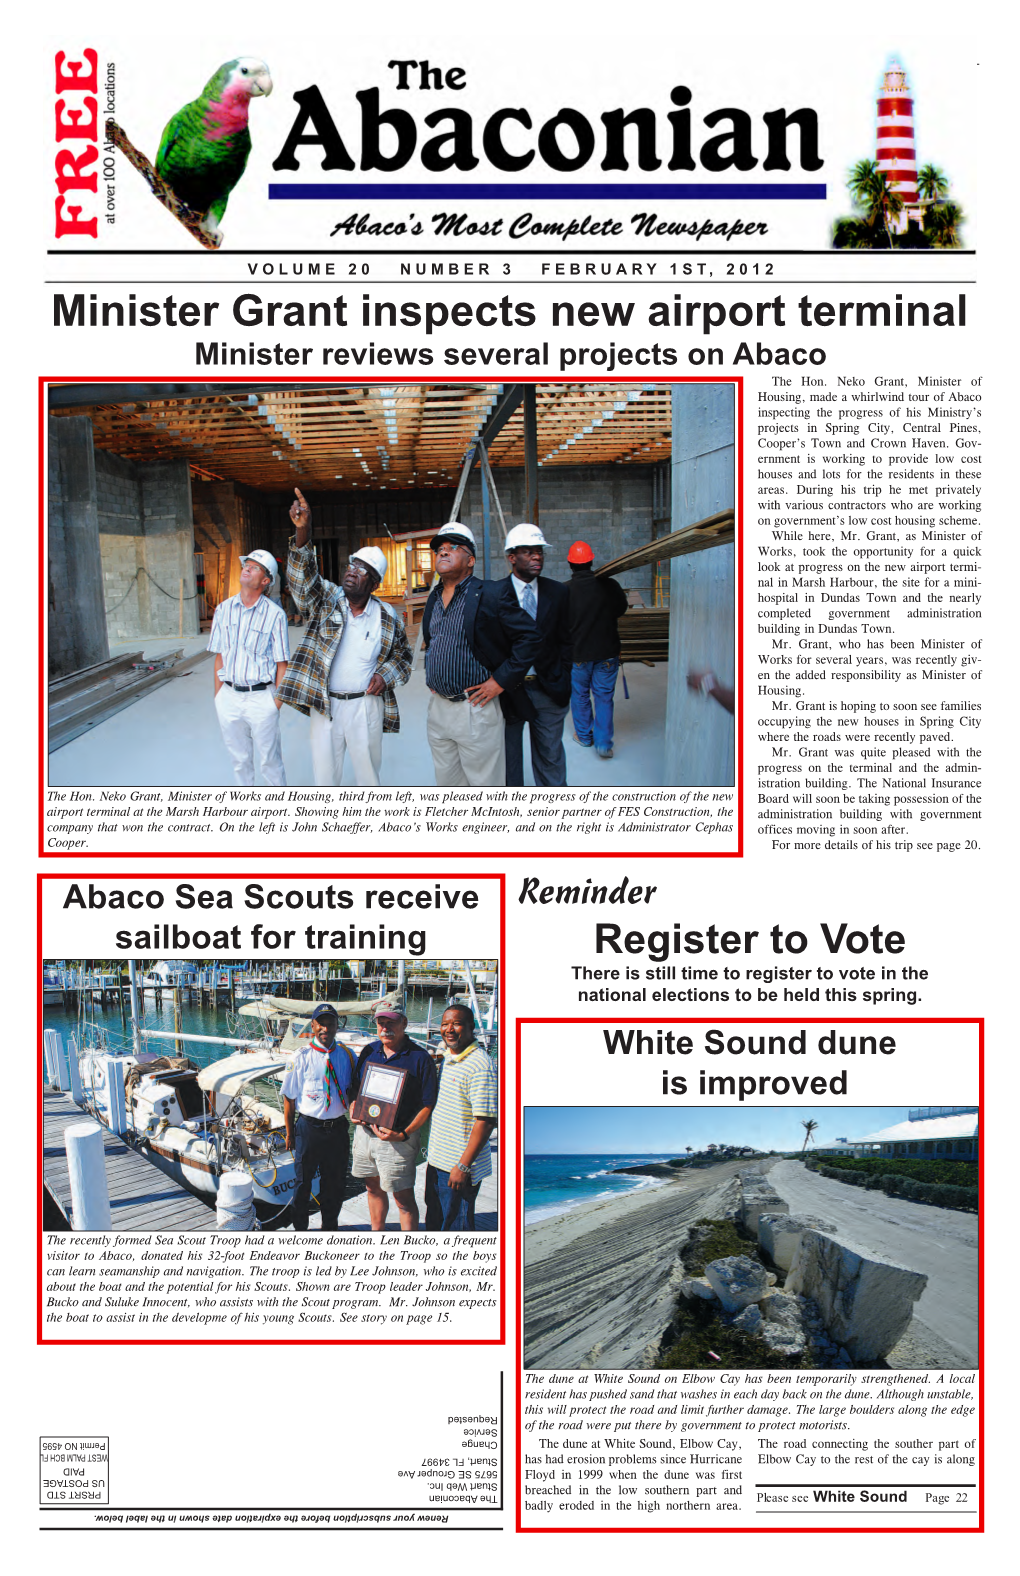 Minister Grant Inspects New Airport Terminal Minister Reviews Several Projects on Abaco the Hon